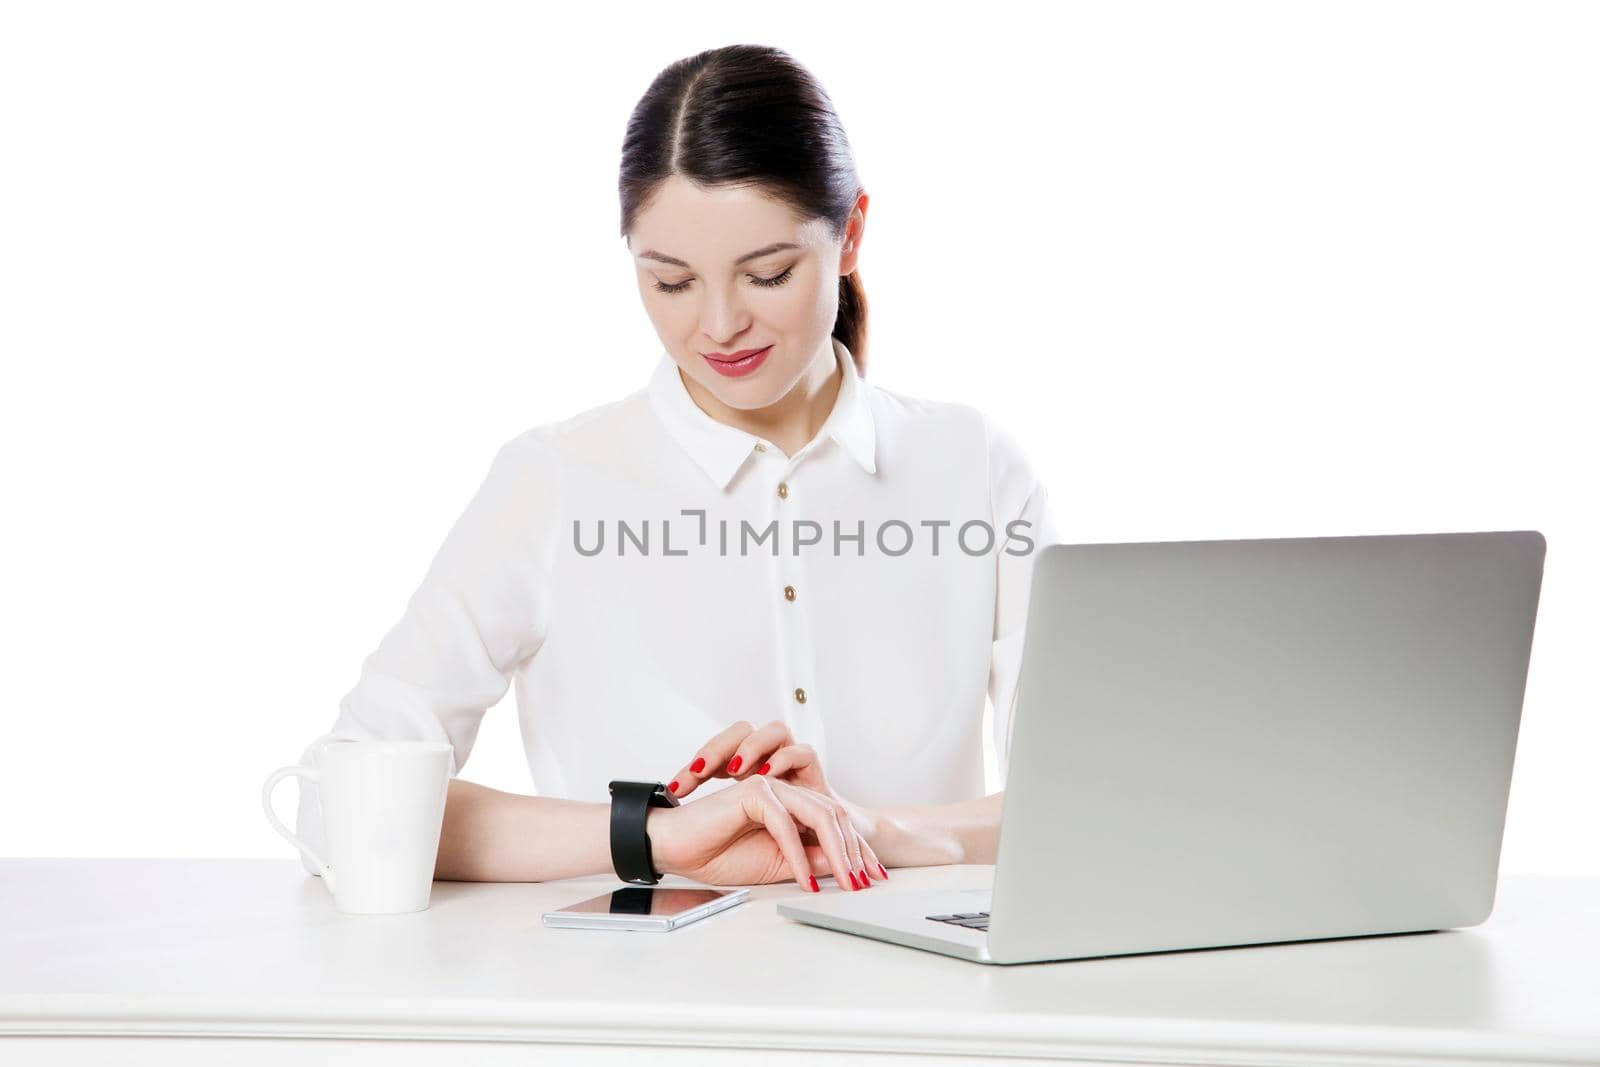 Portrait of happy attractive brunette businesswoman in white shirt sitting looking and touching her smartwatch display, reading something and smiling. indoor studio shot, isolated in white background.